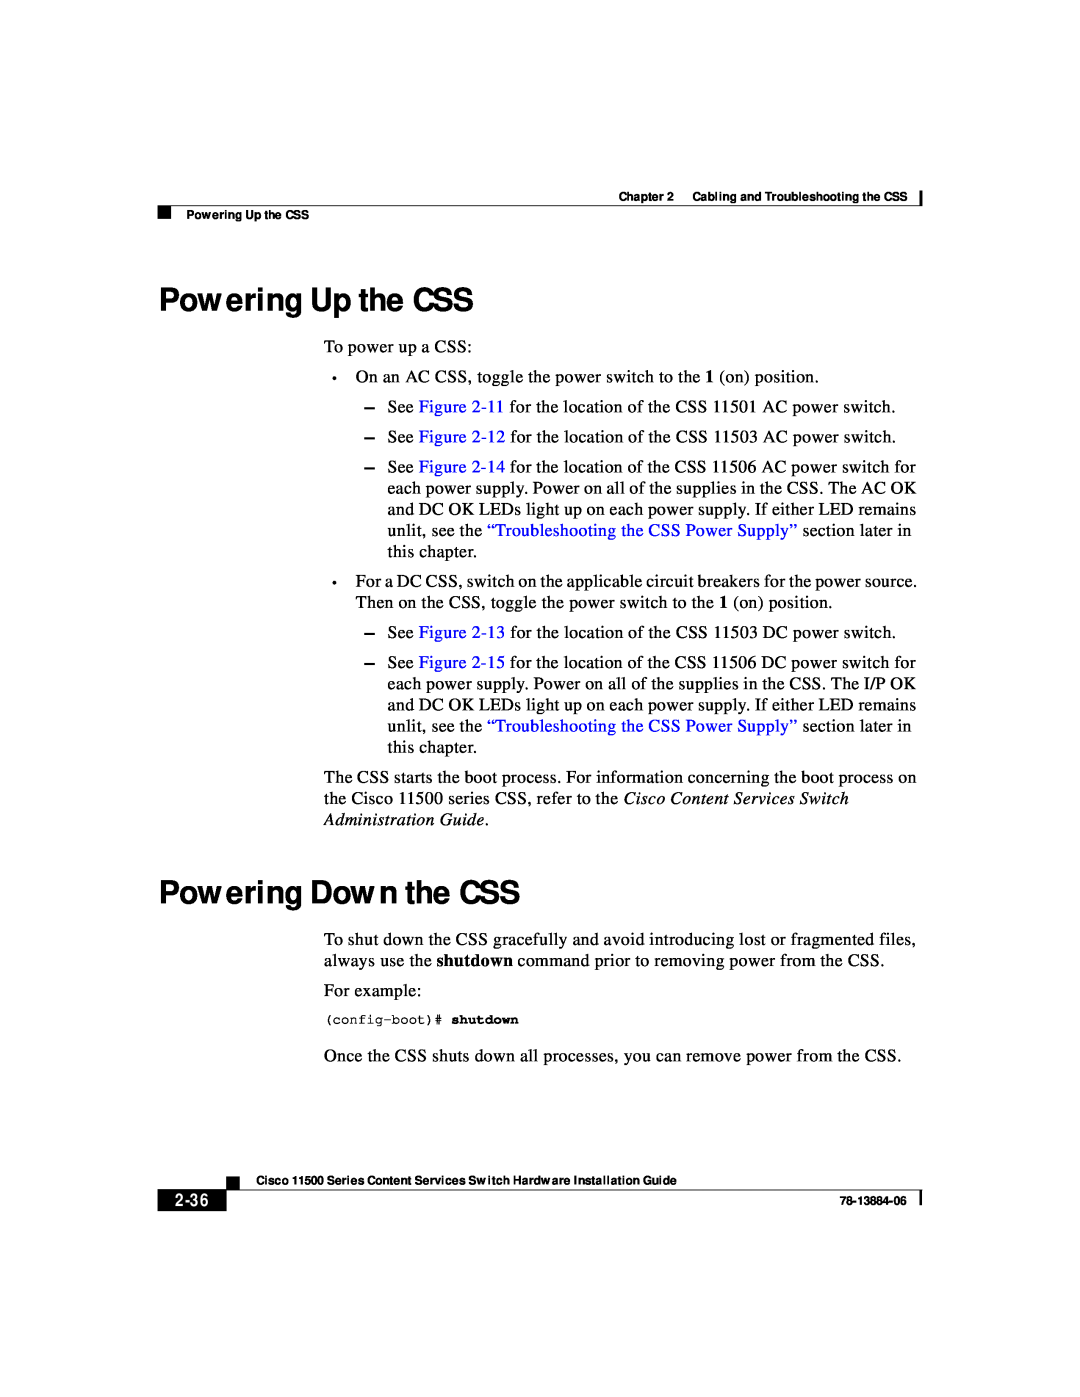 Cisco Systems 11500 Series manual Powering Up the CSS, Powering Down the CSS, 2-36 